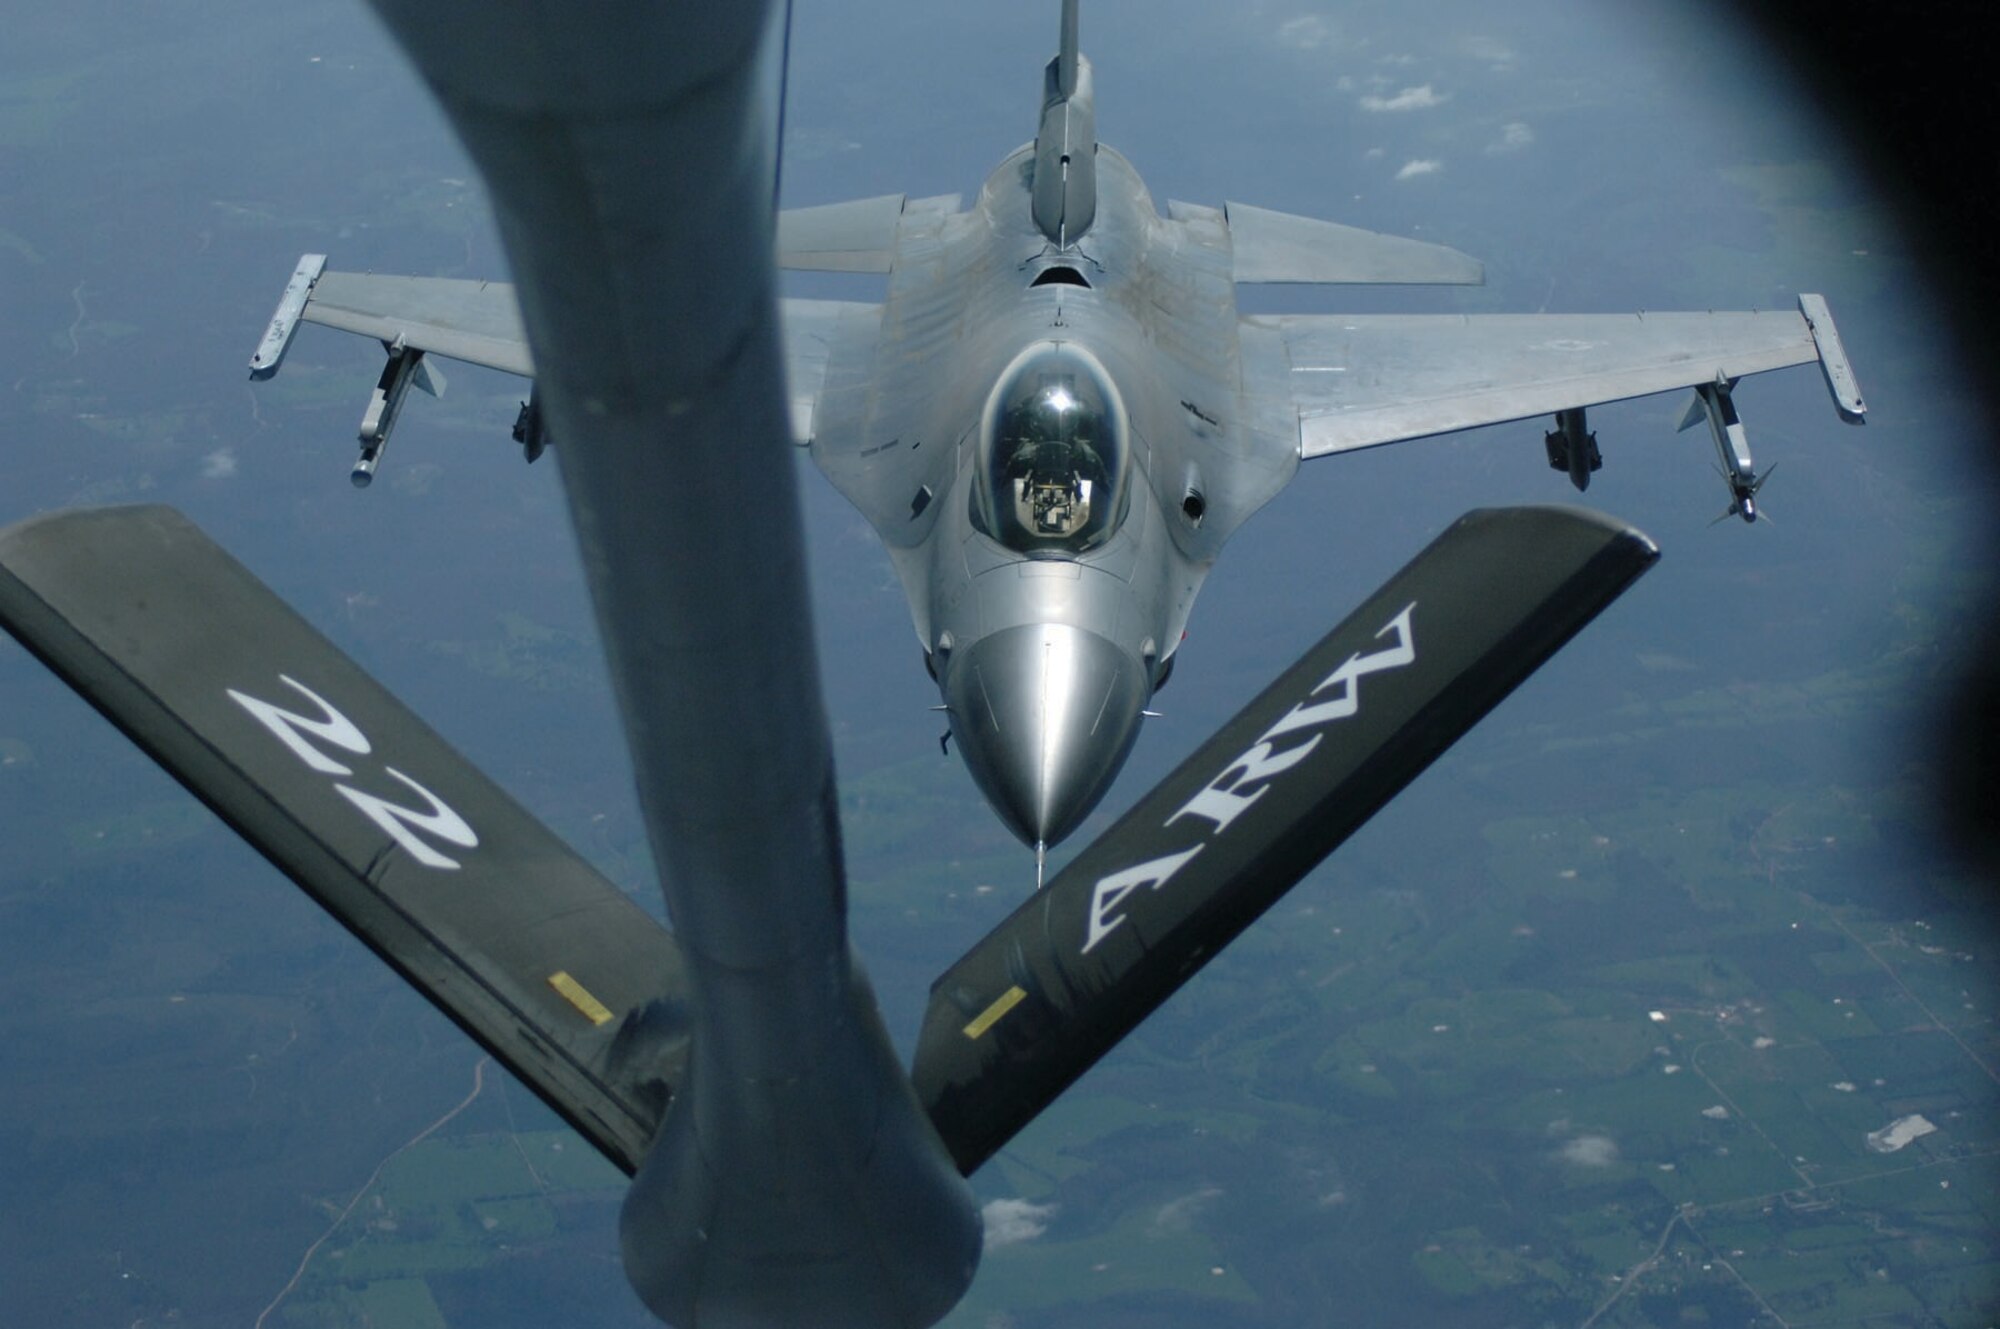 An Arkansas Air National Guard F-16C from the 188th Fighter Wing at Fort Smith, Ark., prepares to receive fuel from a KC-135R Stratotanker. The aircraft was crewed by members of the 931st Air Refueling Group’s 18th Air Refueling Squadron.